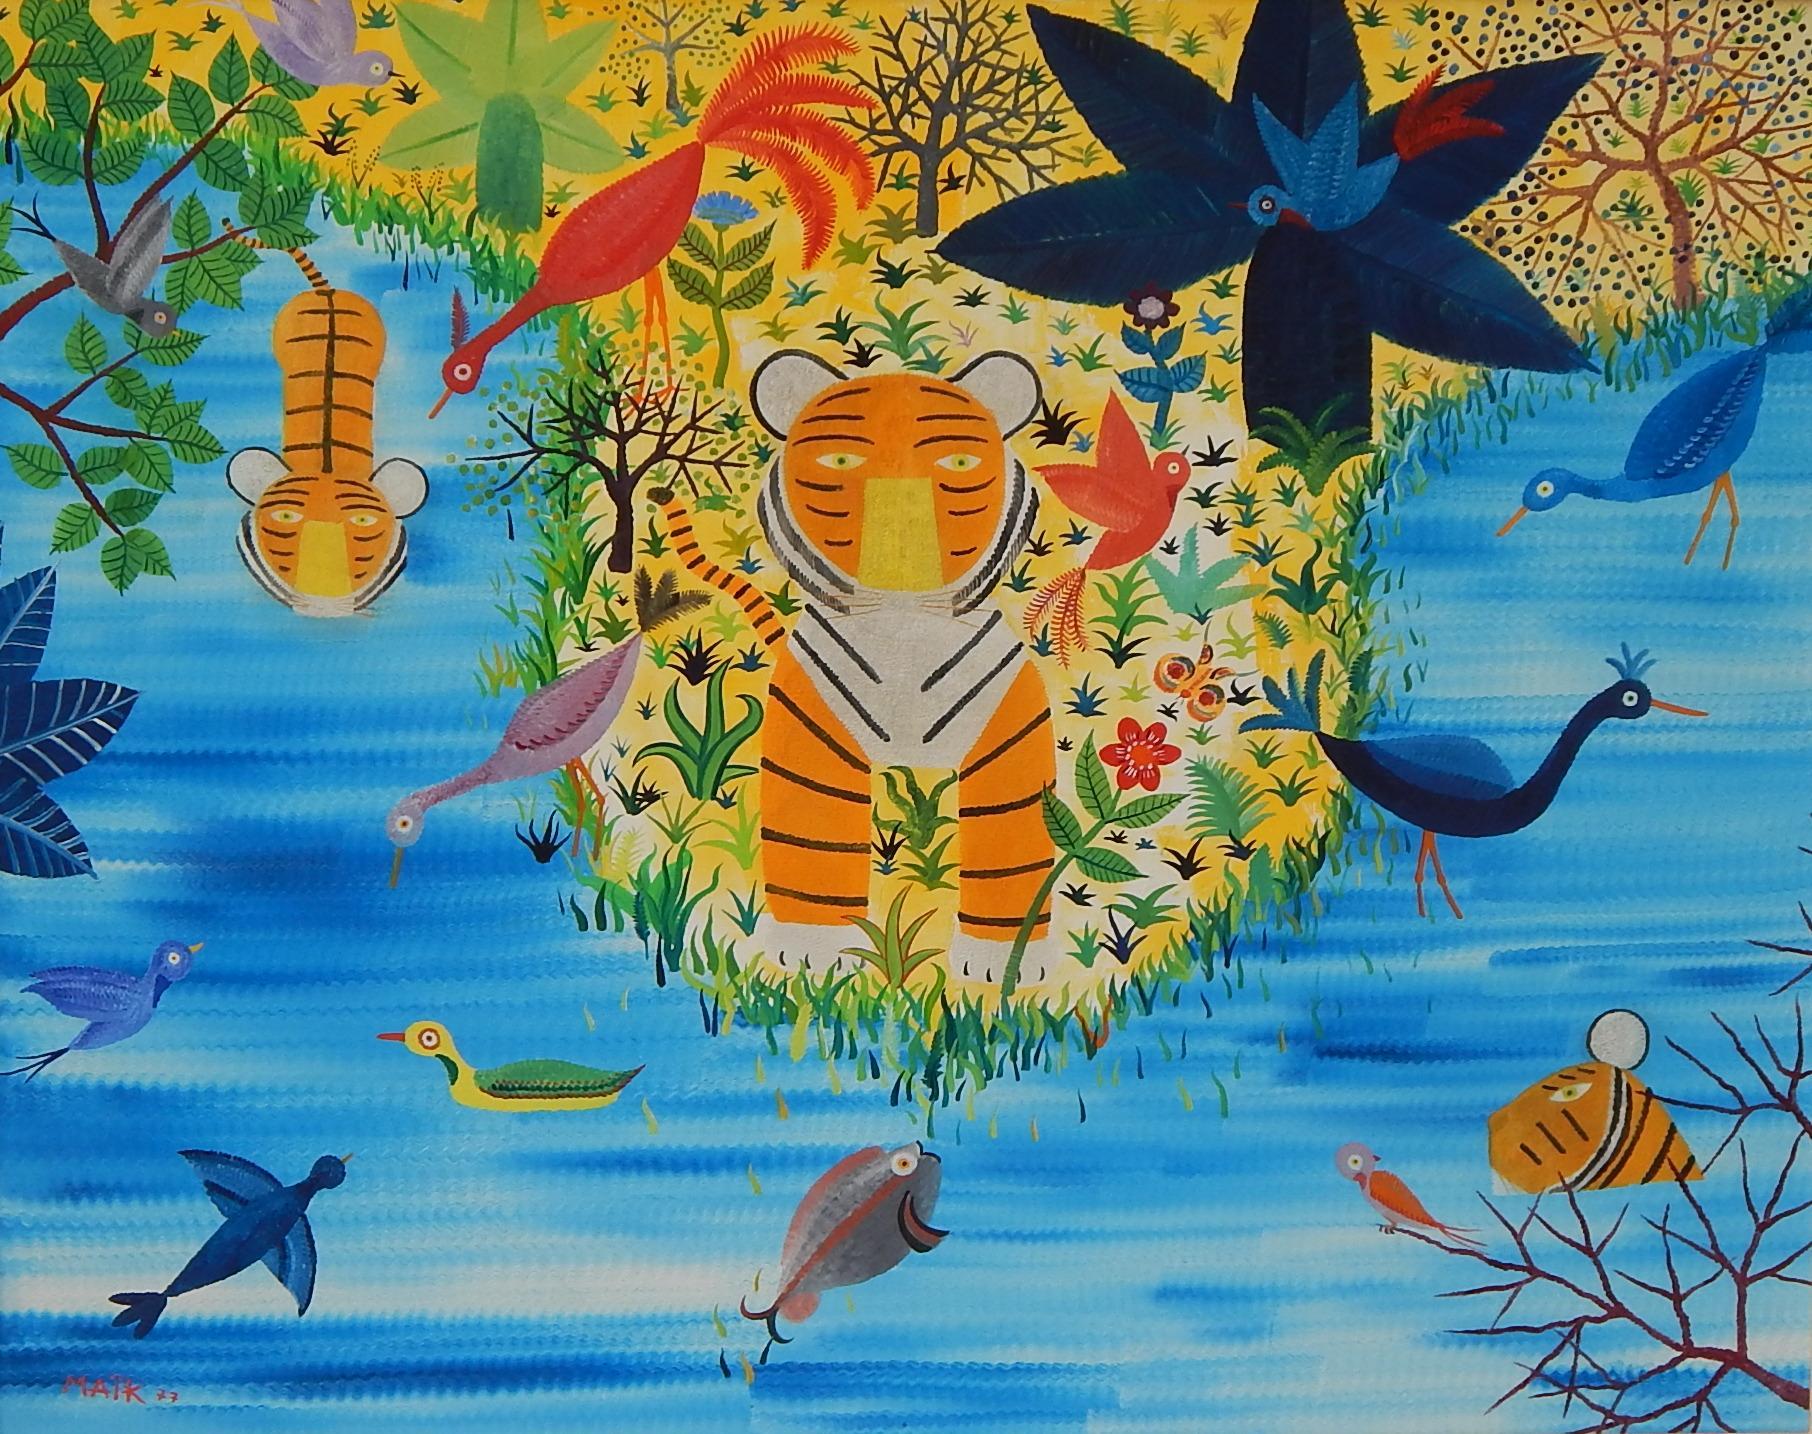 Whimsical oil on canvas by Henri Maik (1922-1993) in excellent condition. 
Titled: “A Good Bath”
Featuring three tigers, one bathing, as well as fish, birds, and flora.
Beautiful bright colors with charming wildlife. 
Measures: 28 7/8